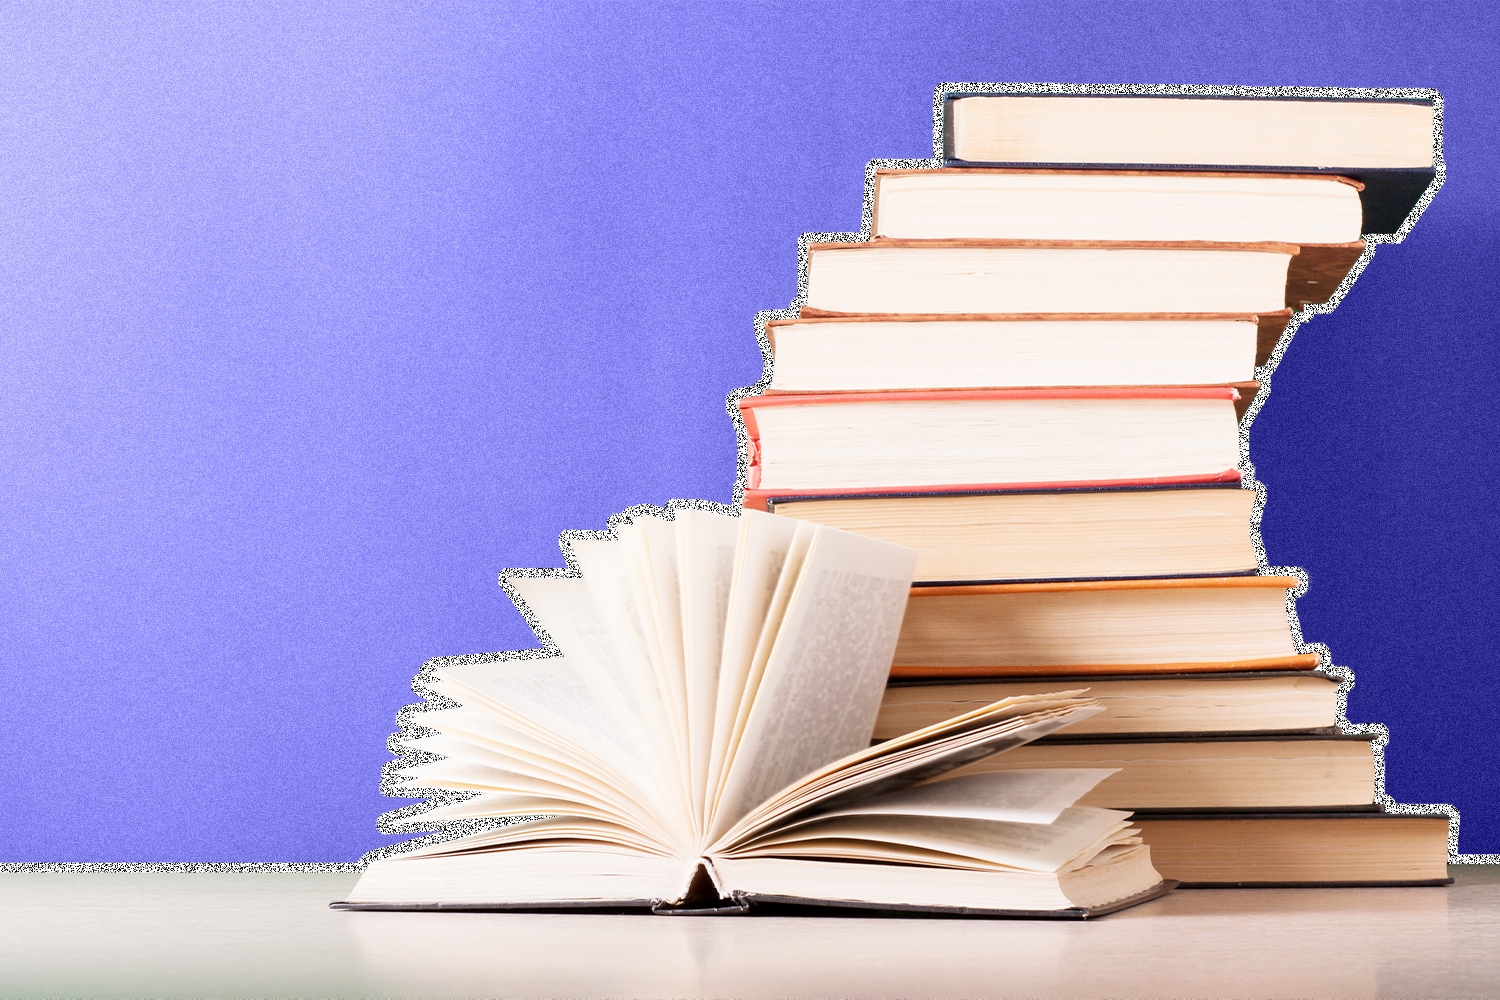 A stack of books on a table with one flipped open, on a purple background